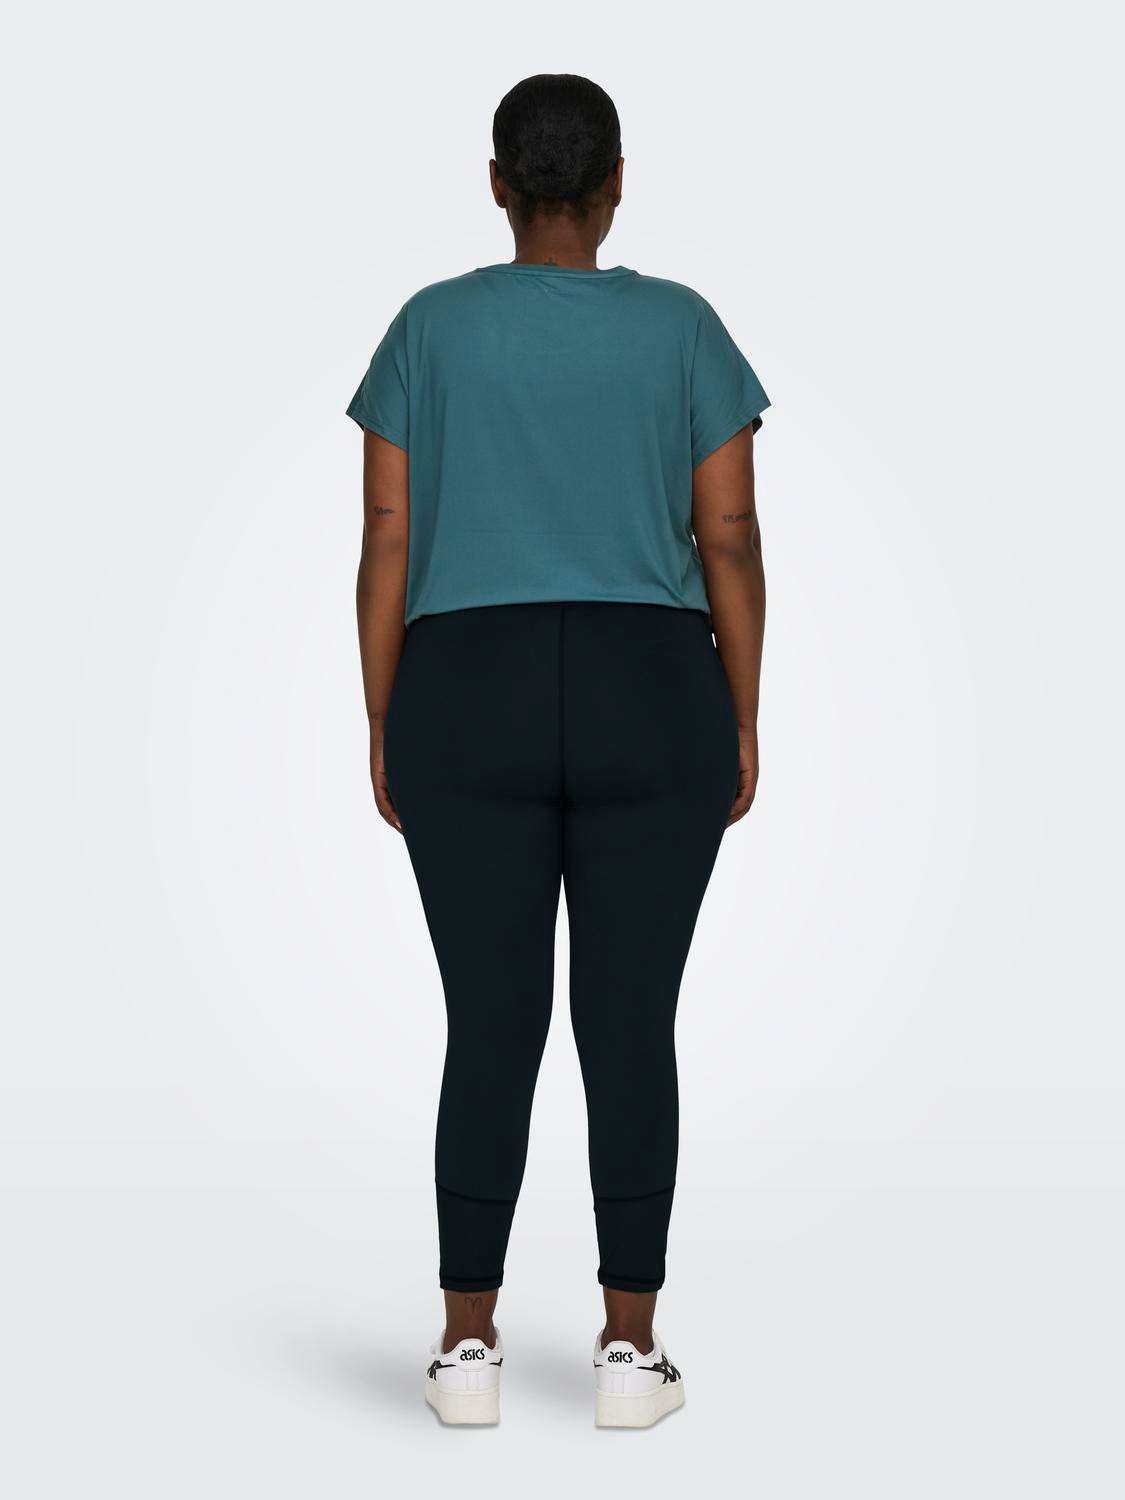 ONLY Tight Fit High waist Curve Leggings -Black - 15289014